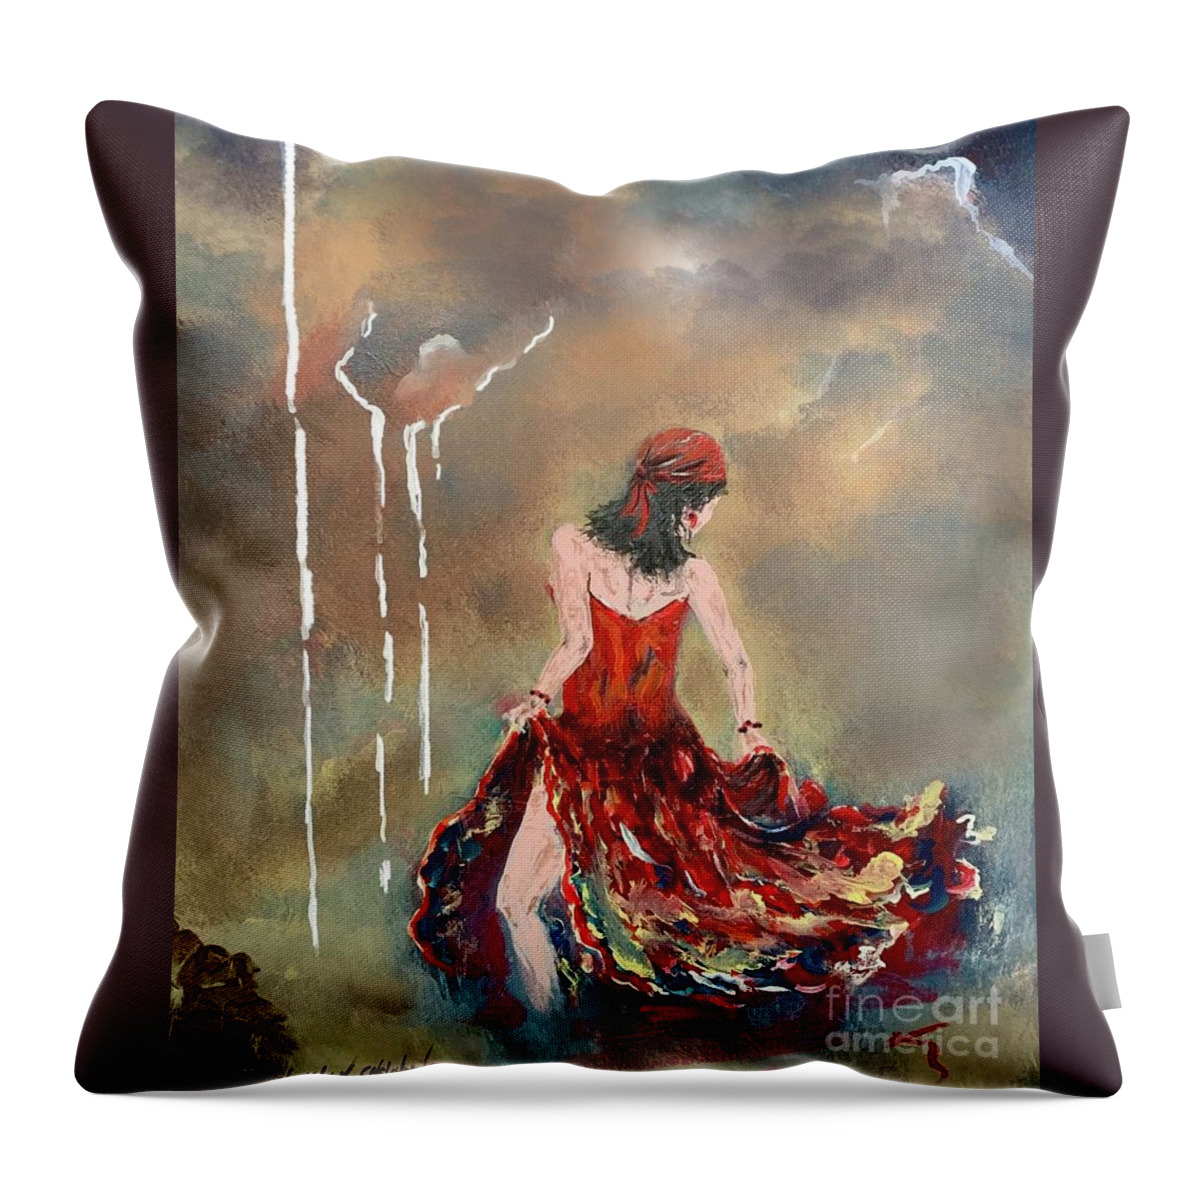 Miroslaw Chelchowski Gypsy In Red Acrylic On Canvas Painting Print Colors Red Dancer Woman Dance Clouds Sky Evening Dress Rain Music Dark Throw Pillow featuring the painting Gypsy in red by Miroslaw Chelchowski